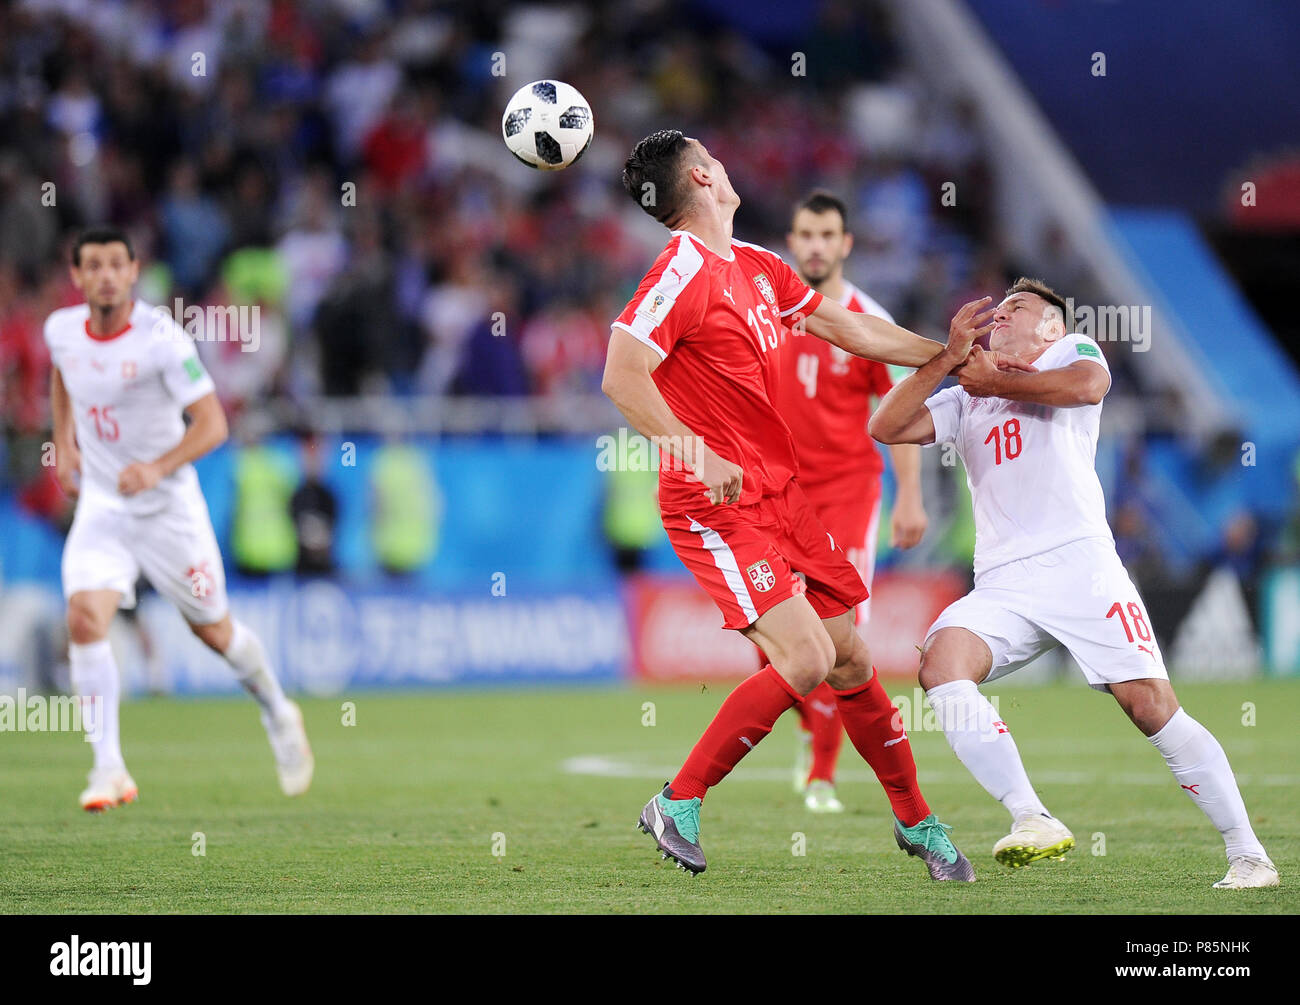 Kaliningrad Russia June 22 Nikola Milenkovic Of Serbia Competes With Mario Gavranovic Of Switzerland During The 18 Fifa World Cup Russia Group E Match Between Serbia And Switzerland At Kaliningrad Stadium